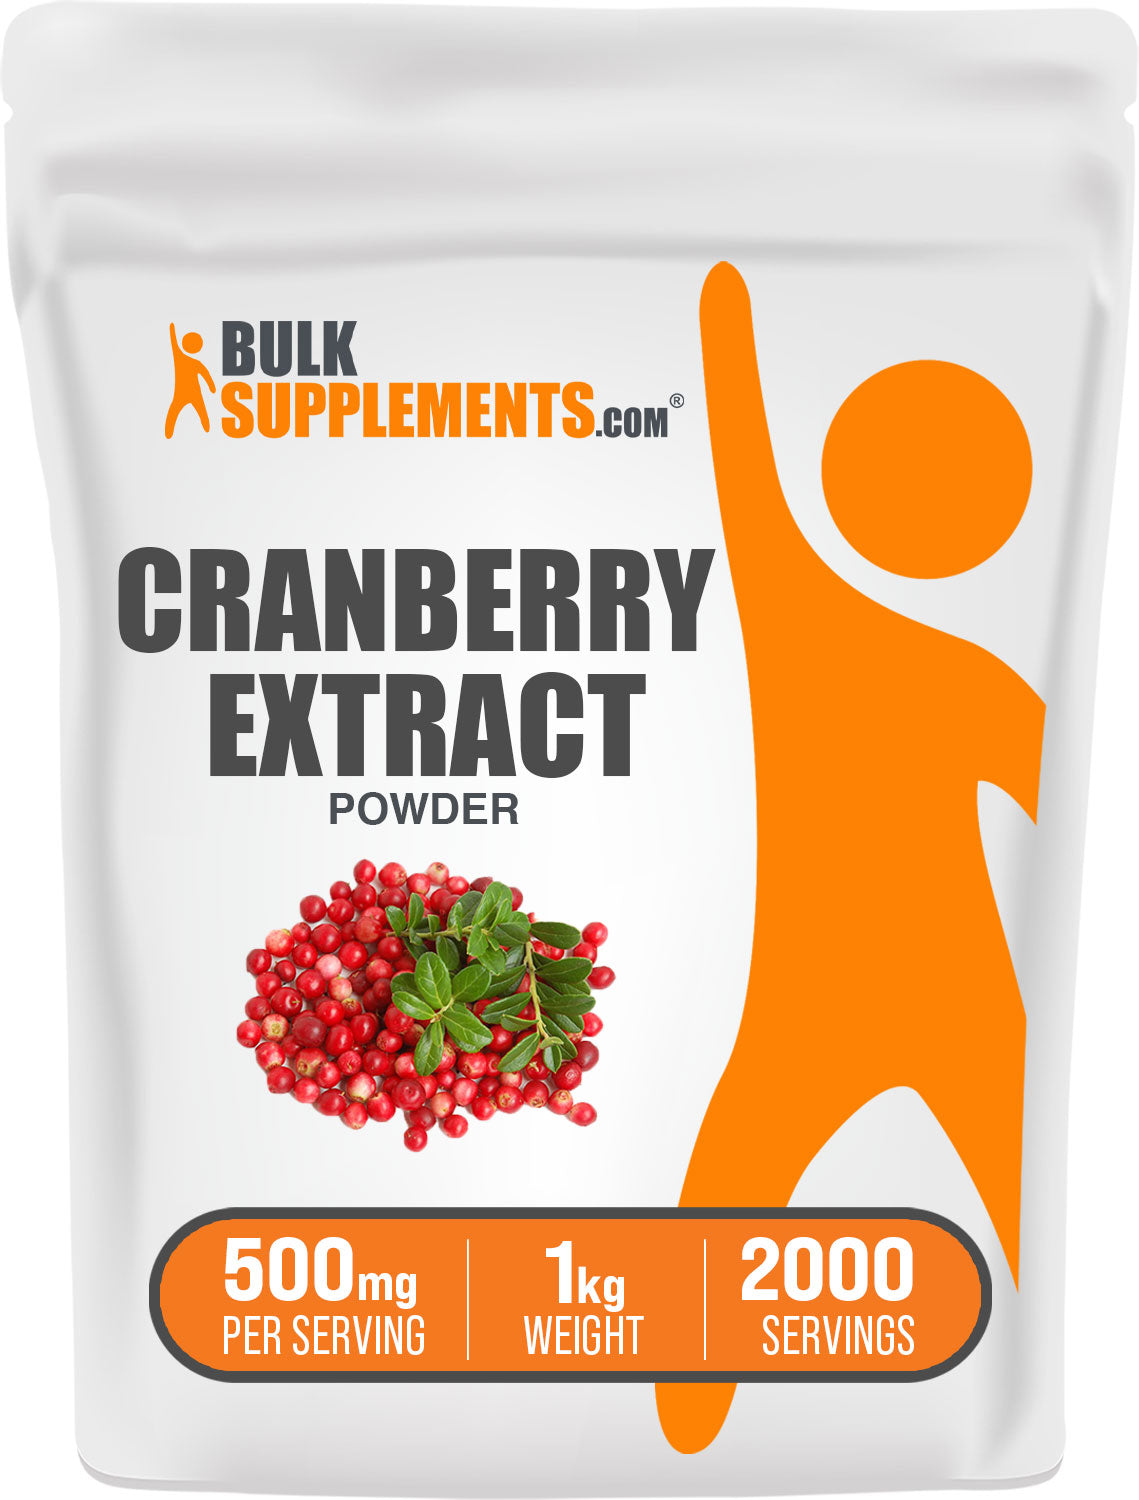 1kg Cranberry Extract